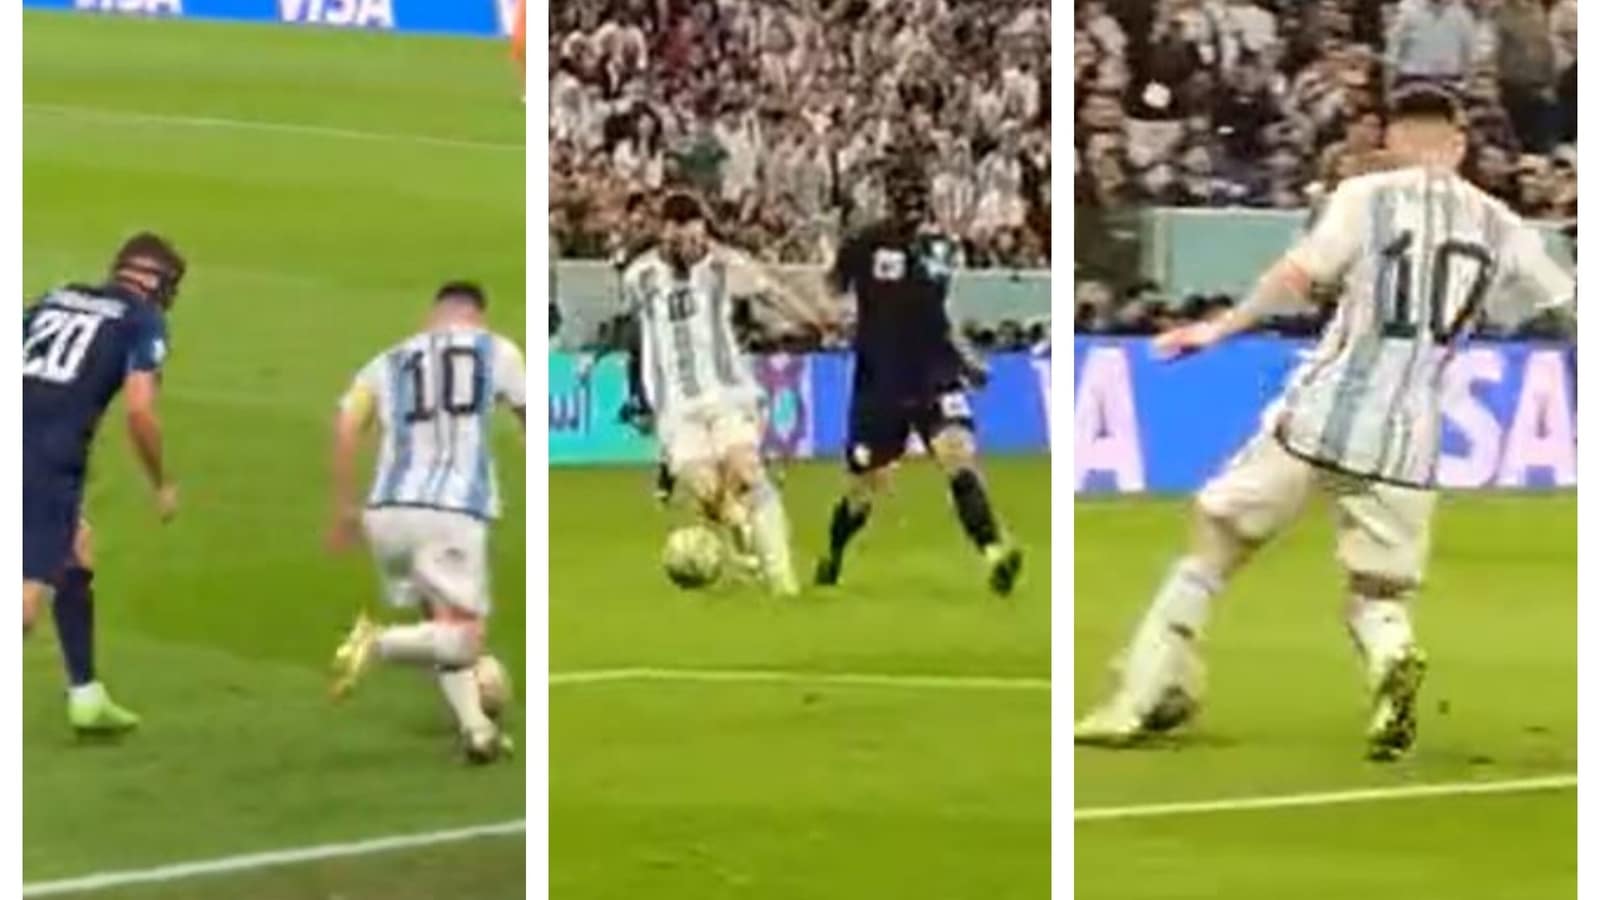 Watch: Messi eclipses Batistuta, goes beyond magical with jaw-dropping assist in World Cup semi vs Croatia